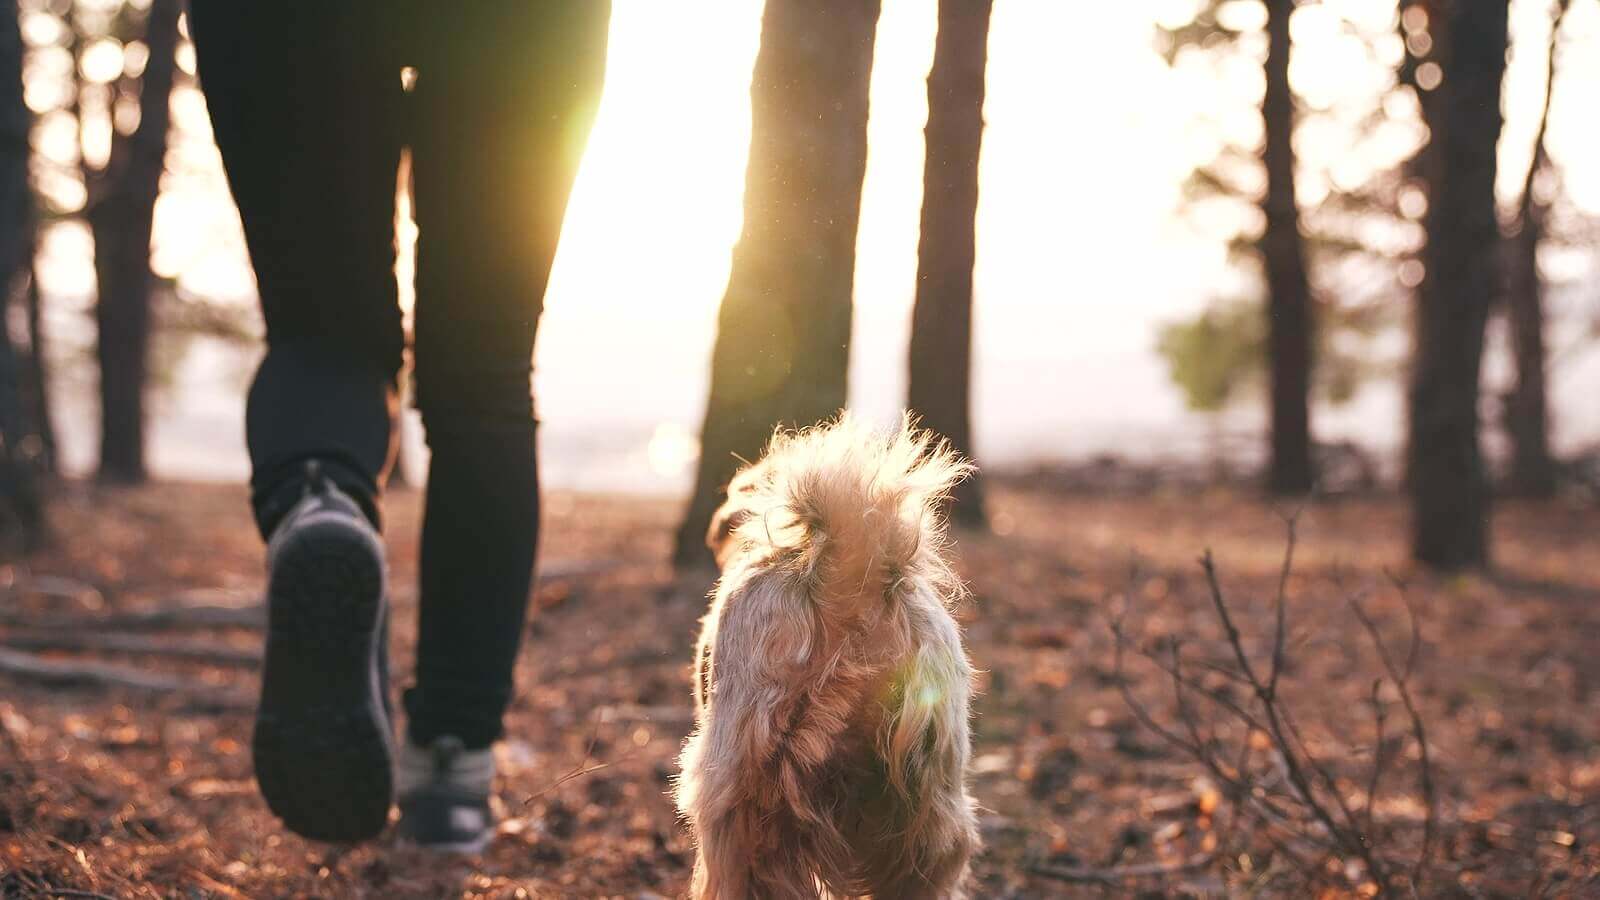 Dog hiking with owner in the forest. Grief counseling nj can help you cope with pet loss and grief in scotch plains nj here.